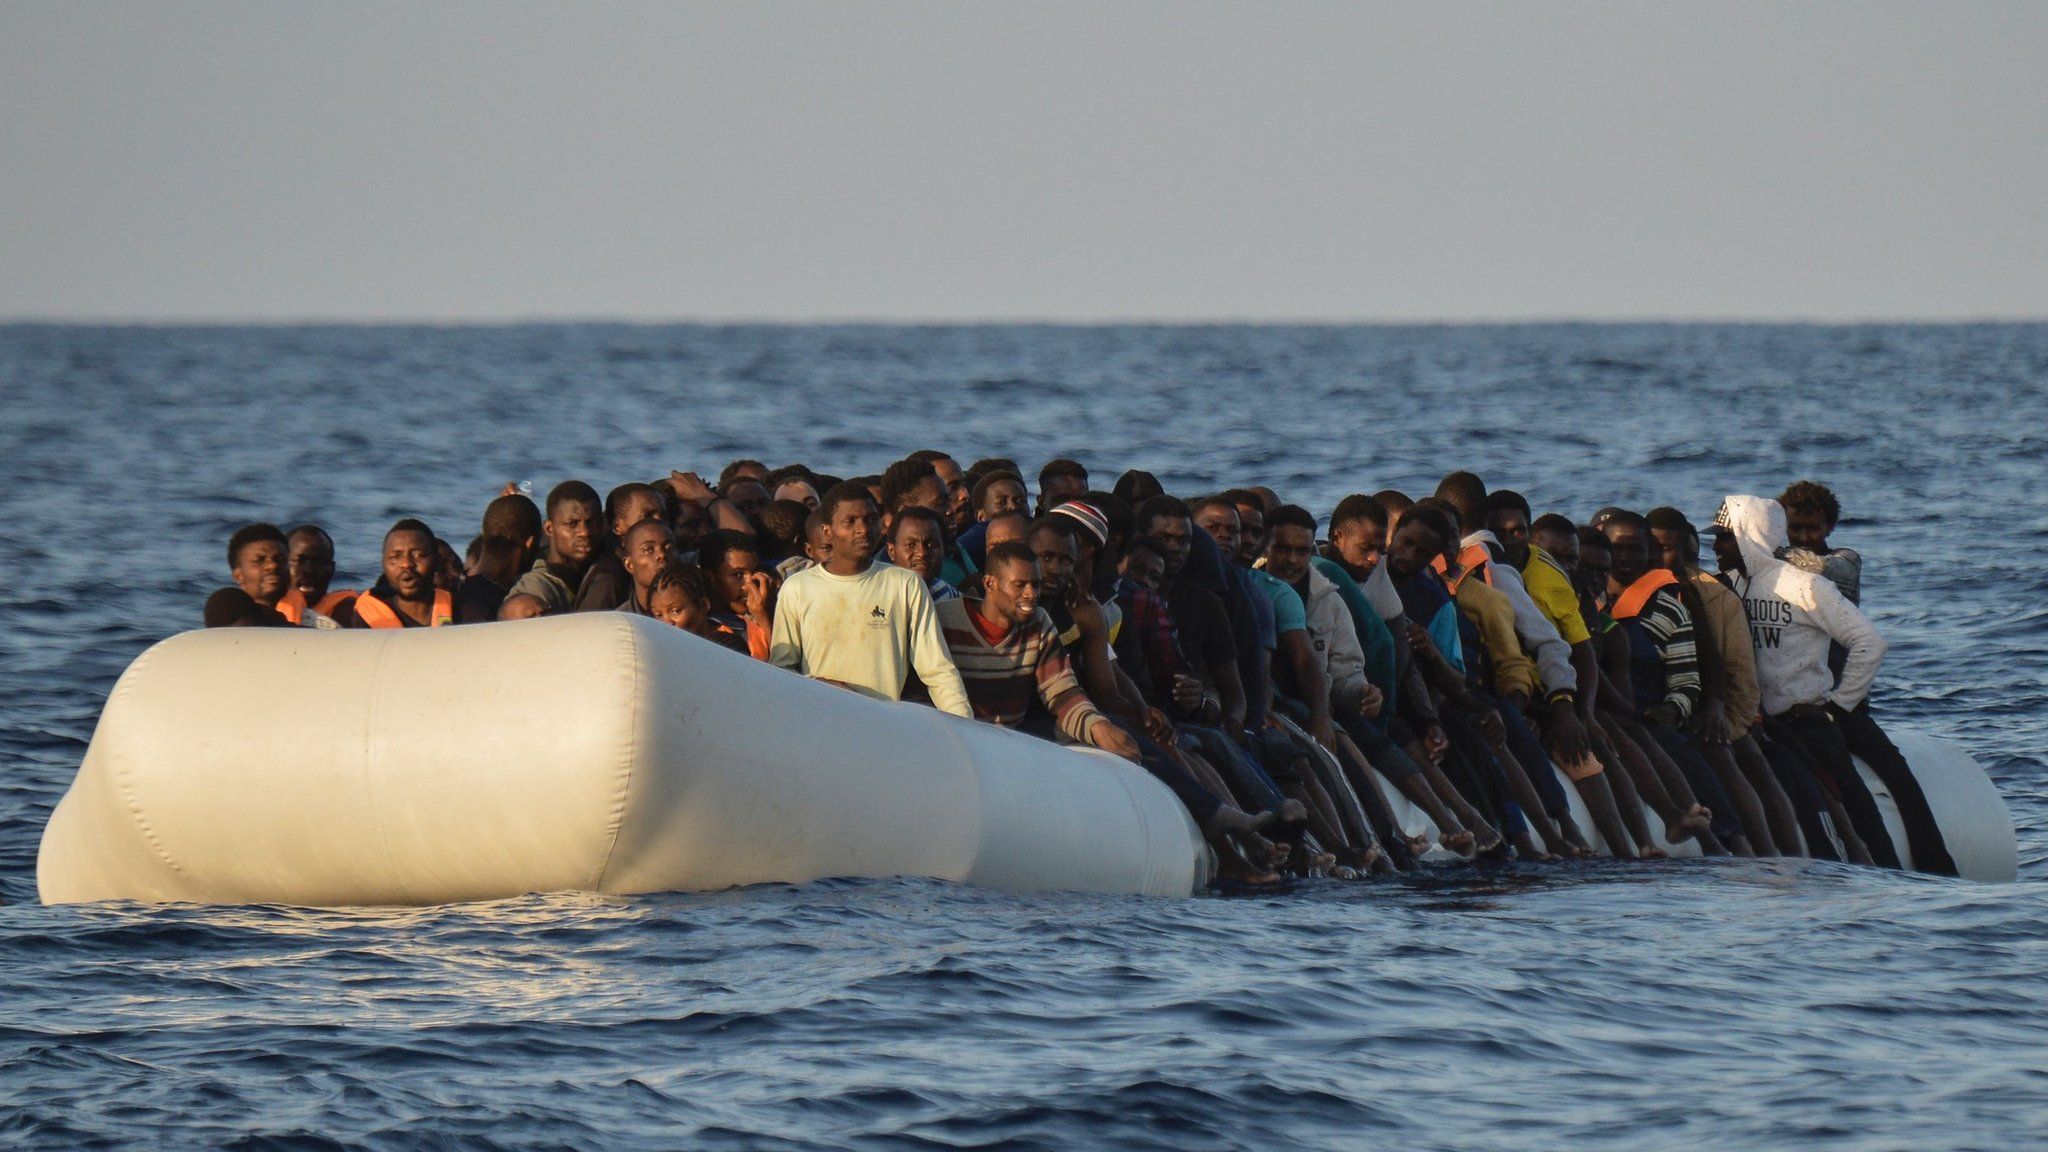 Migrants on rubber boat before being rescued off the Libyan coast in the Mediterranean Sea, on November 3, 2016.